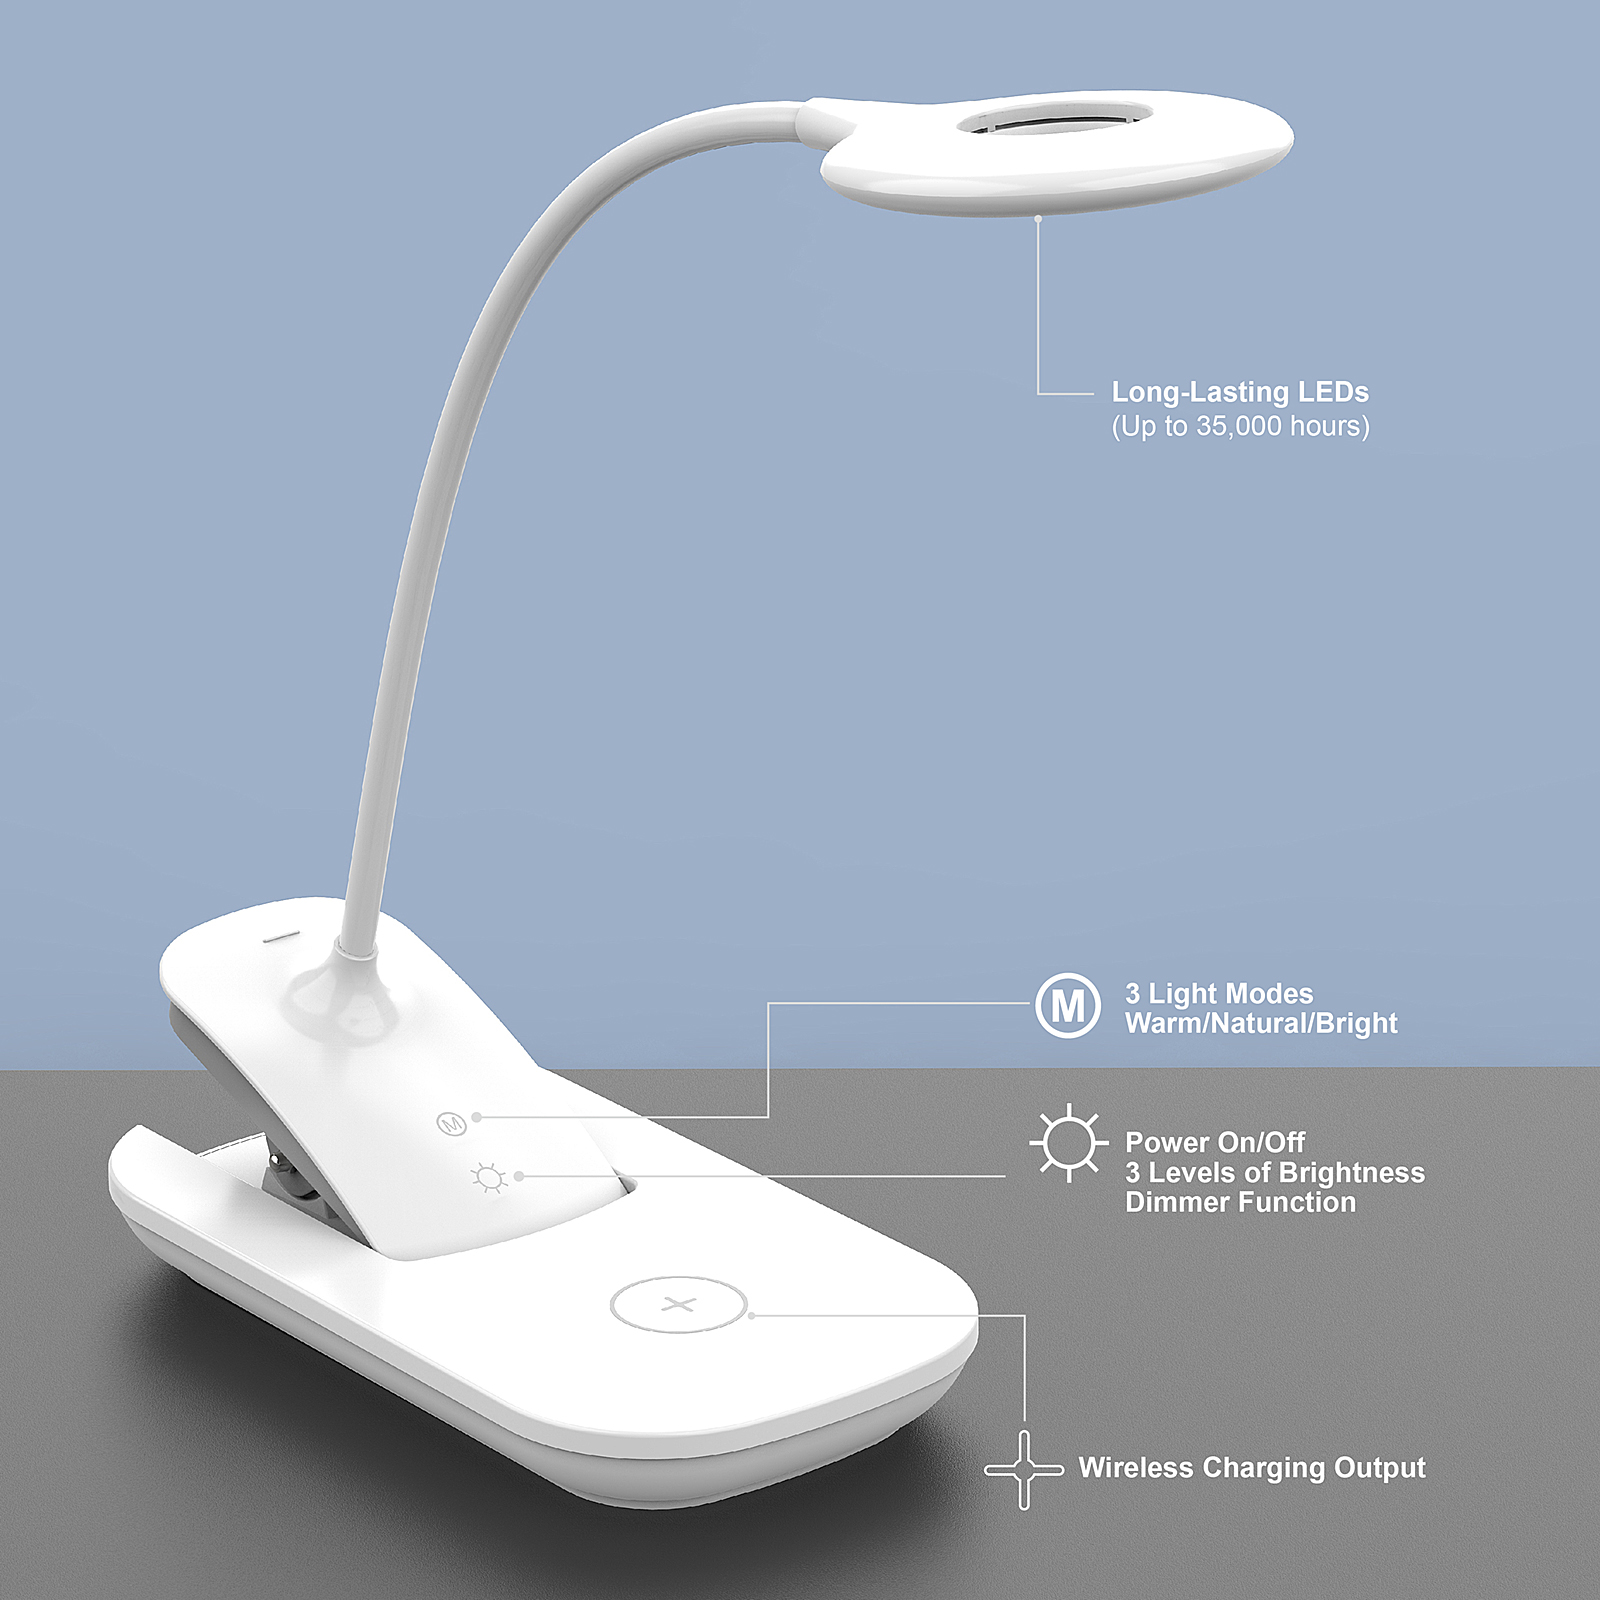 Rechargeable LED desk lamp with wireless charging base